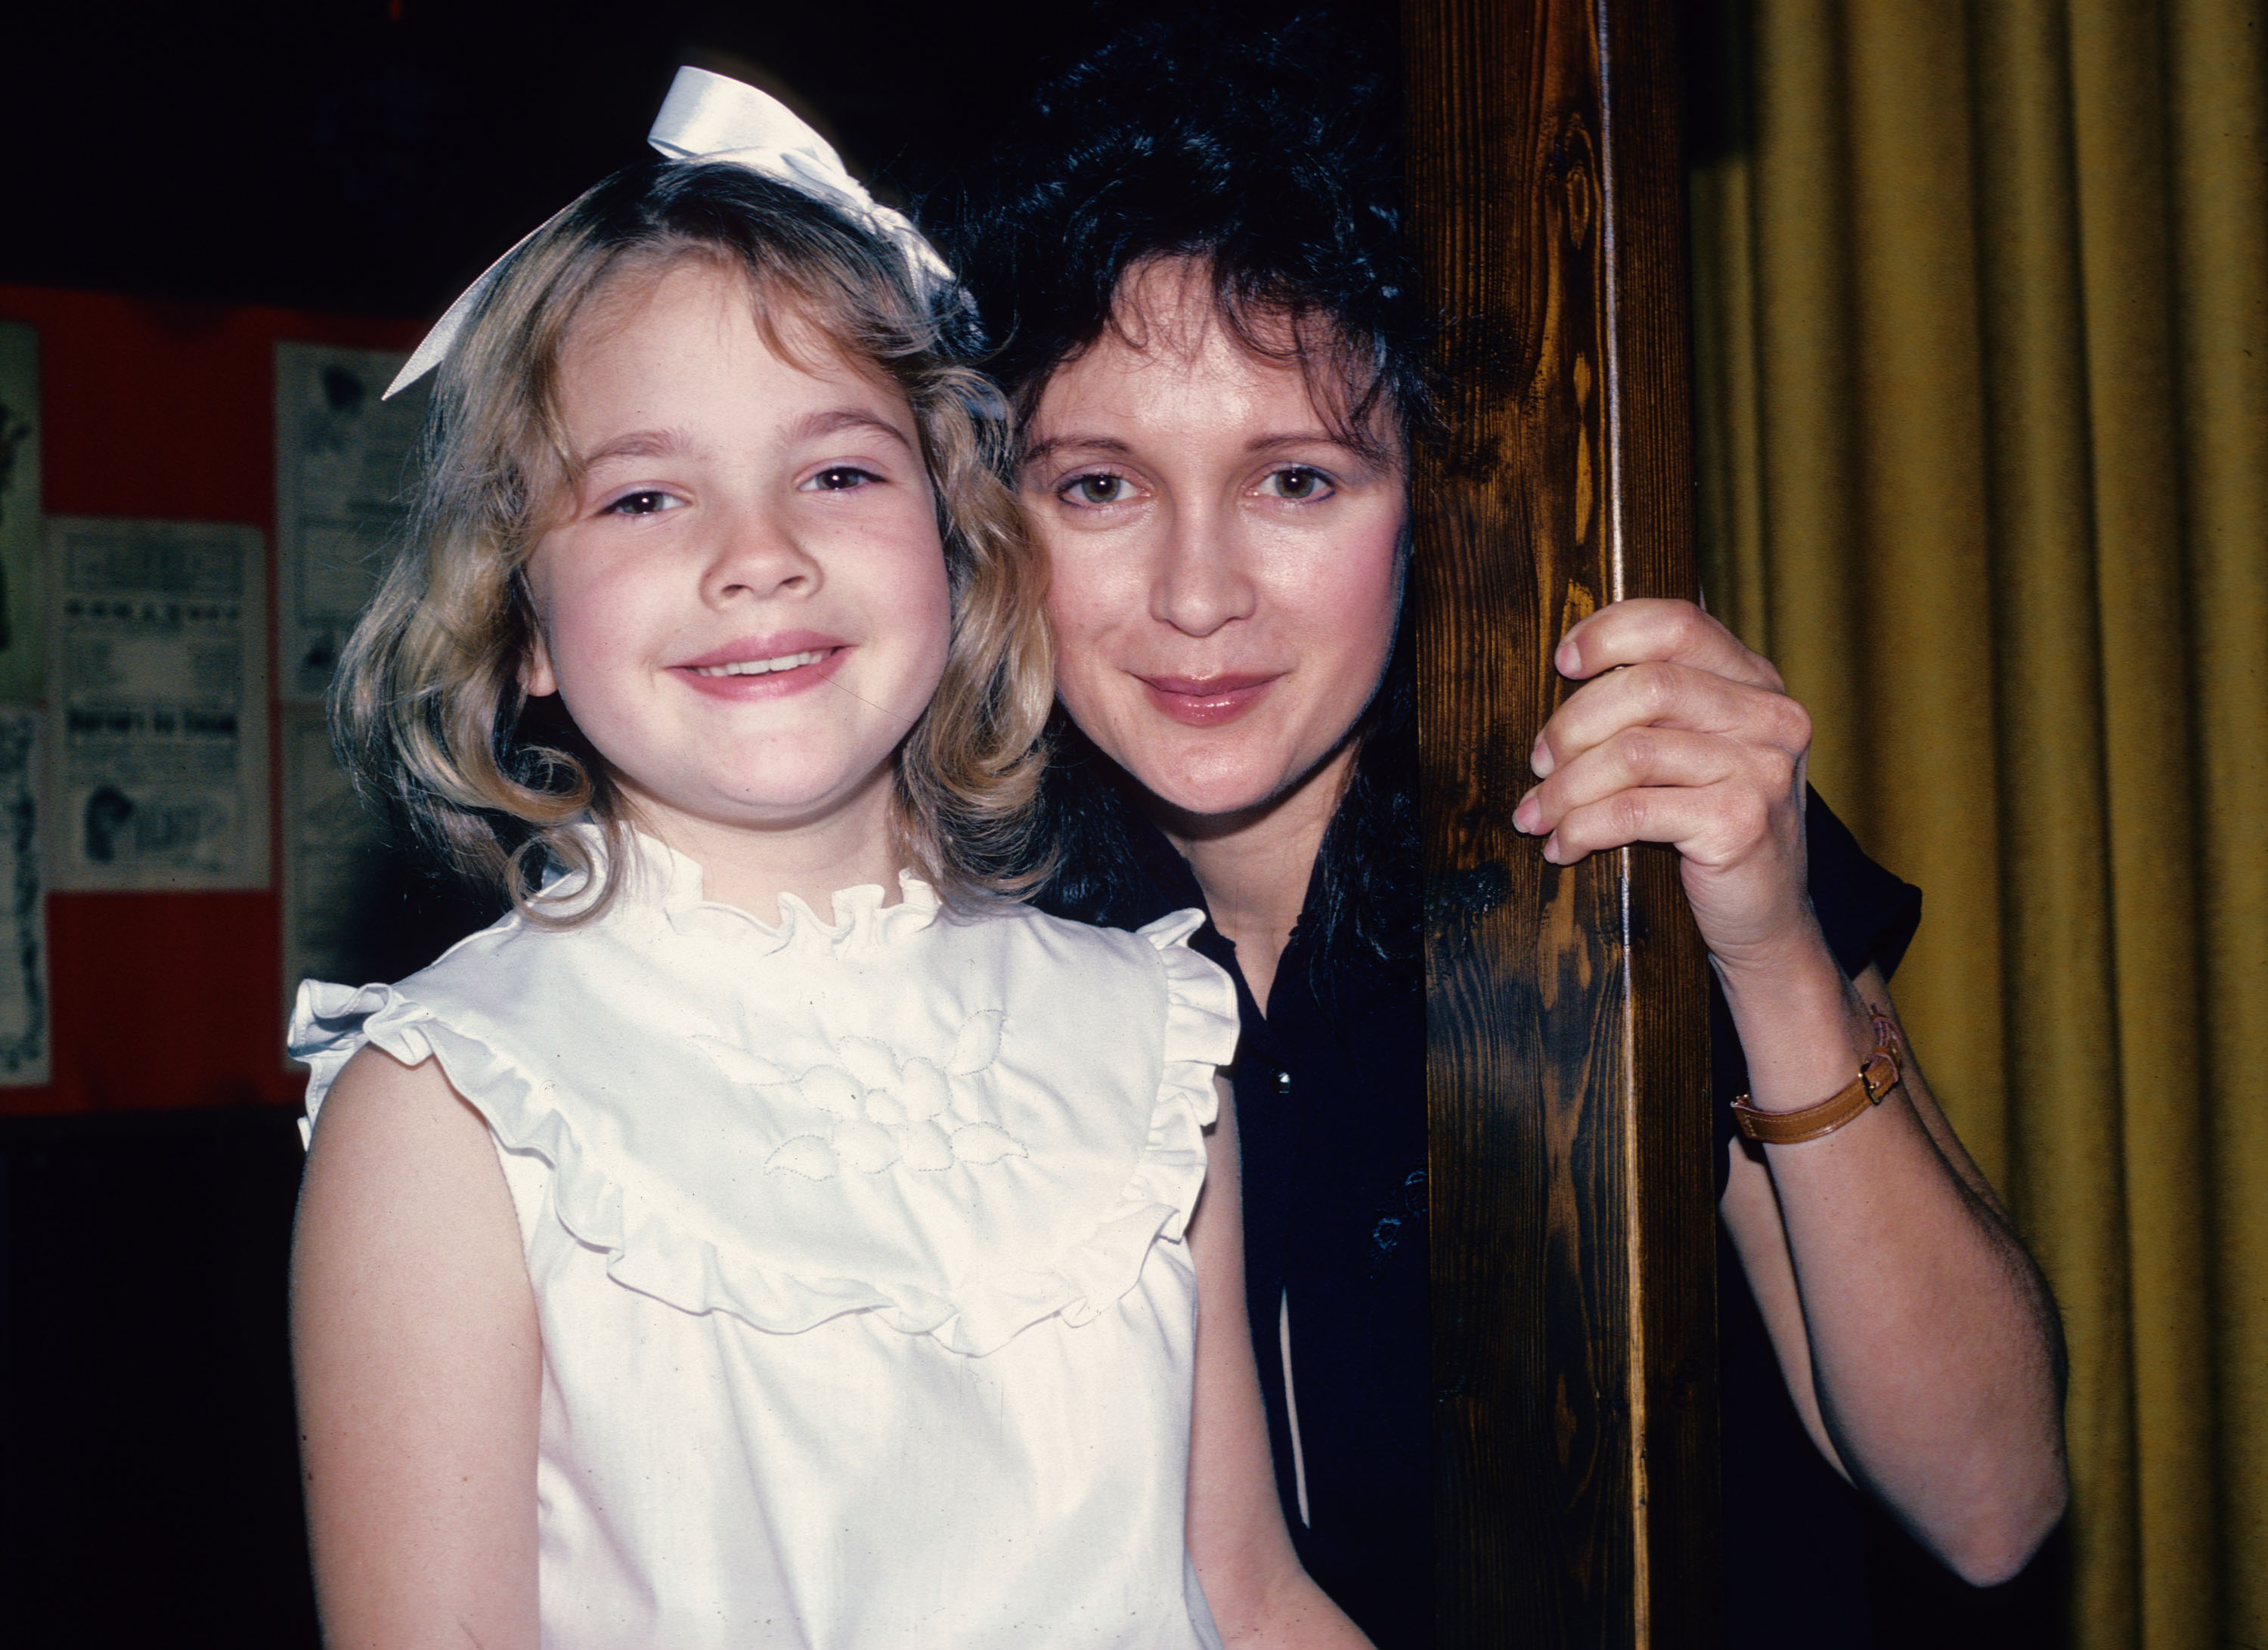 The movie star poses for a photograph with her mother in New York City, on June 8, 1982. | Source: Getty Images